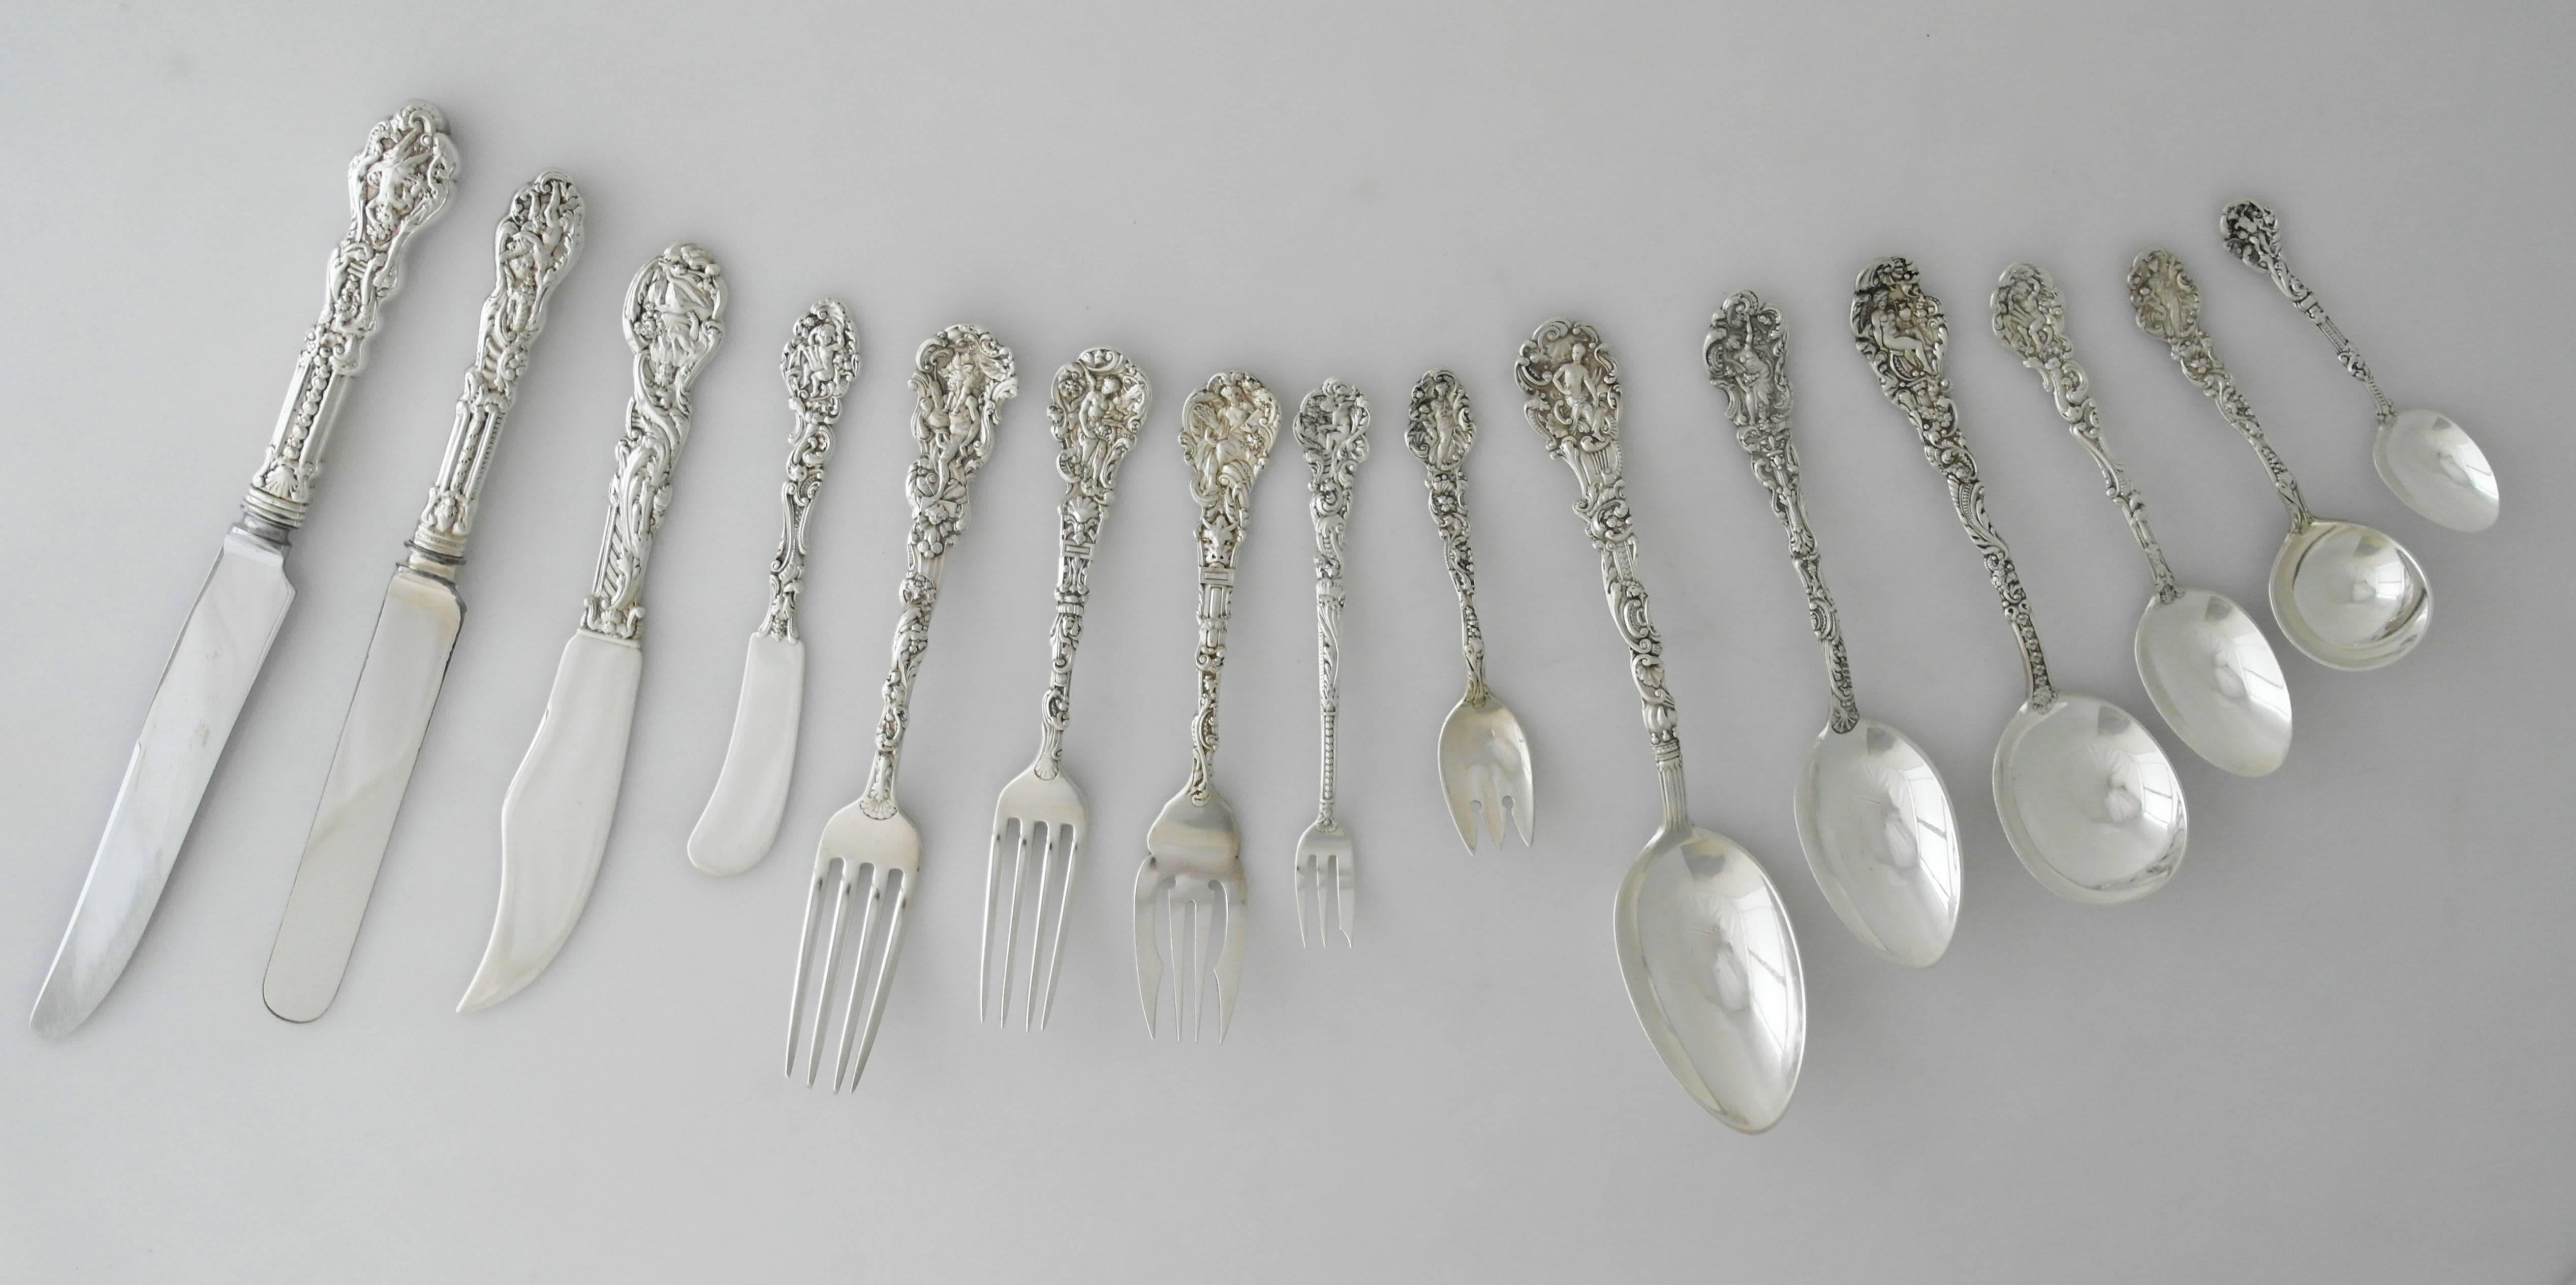 Being offered is a large and important sterling silver flatware set by Gorham of Providence, Rhode Island. In the Versailles pattern, designed by F. Antoine Heller. Comprising 15 piece place settings for 12 guests, including serving pieces. Set